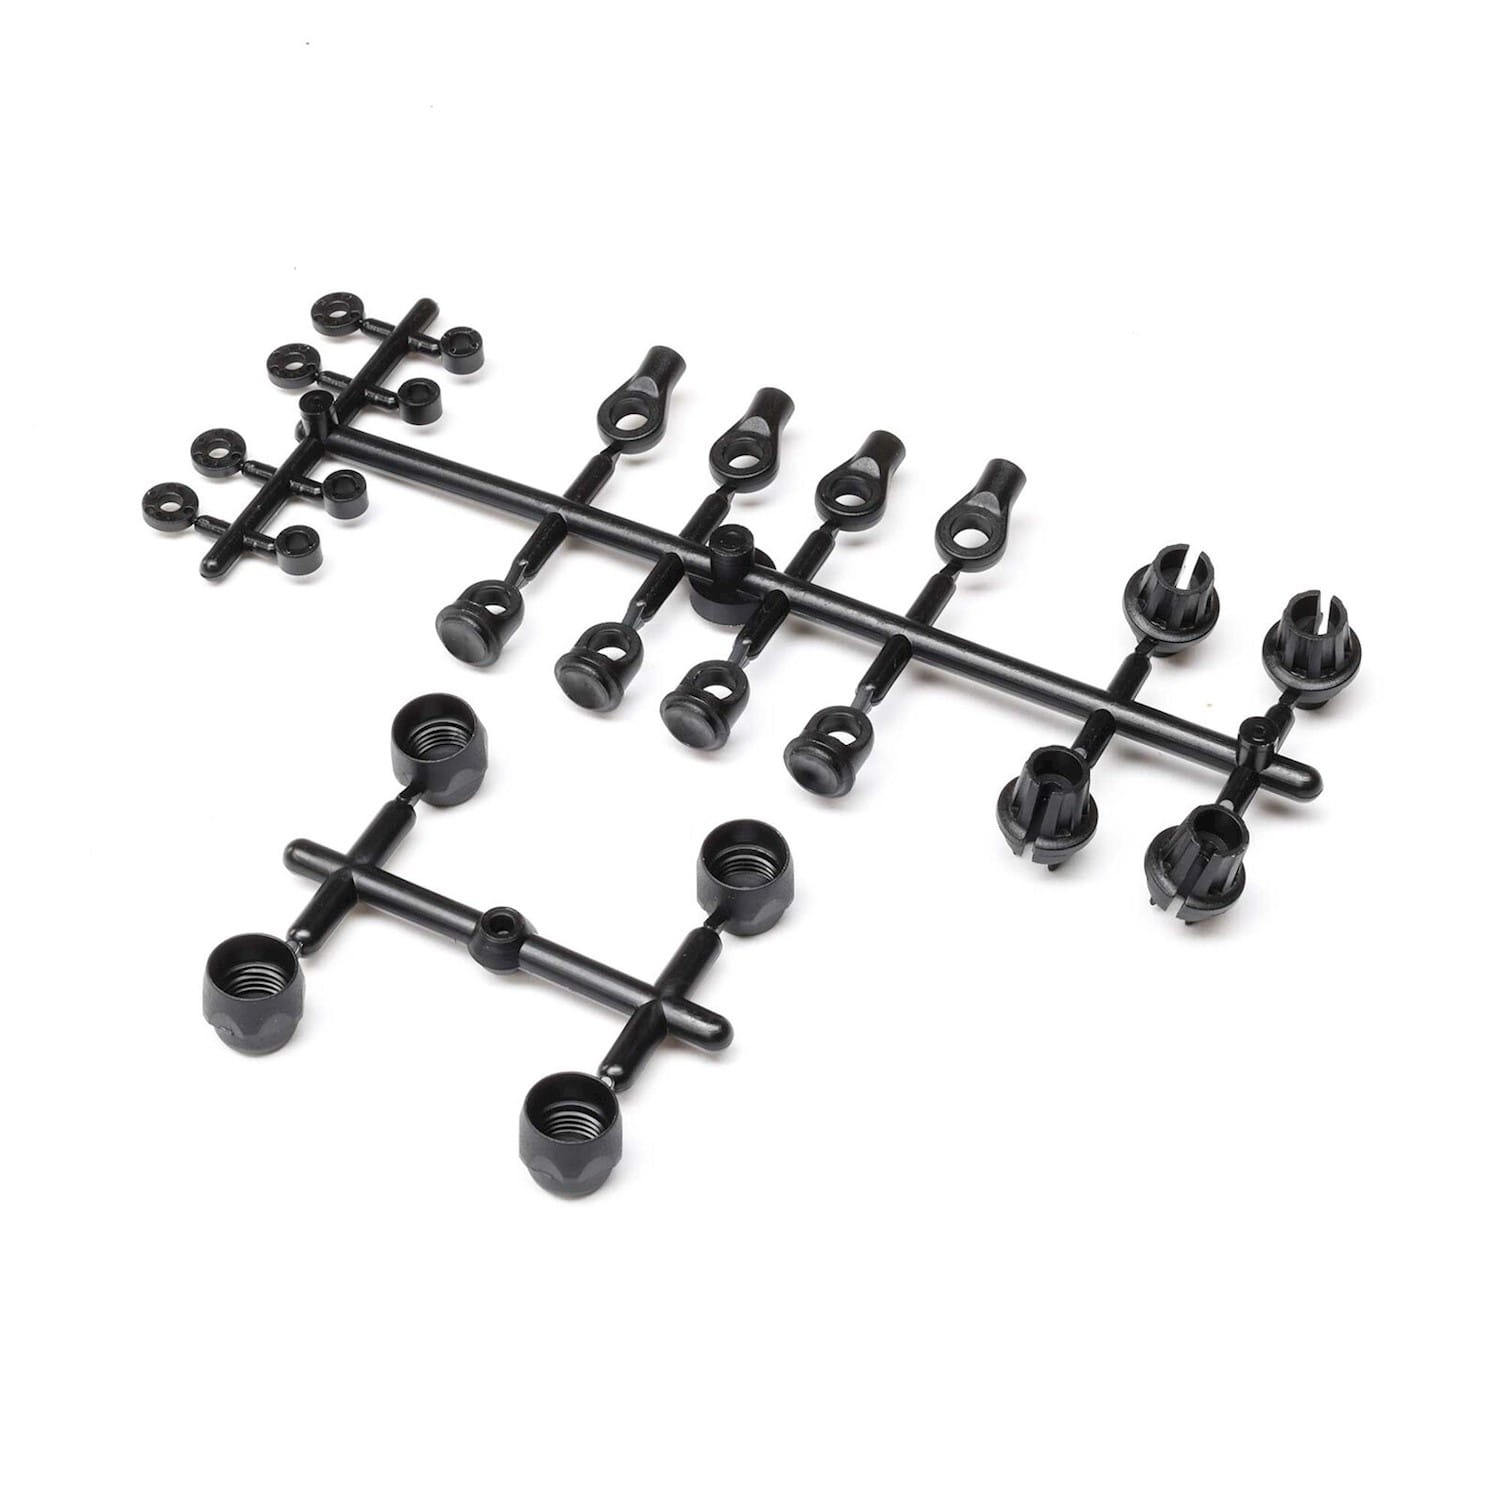 Axial Molded Shock Parts Set: PRO